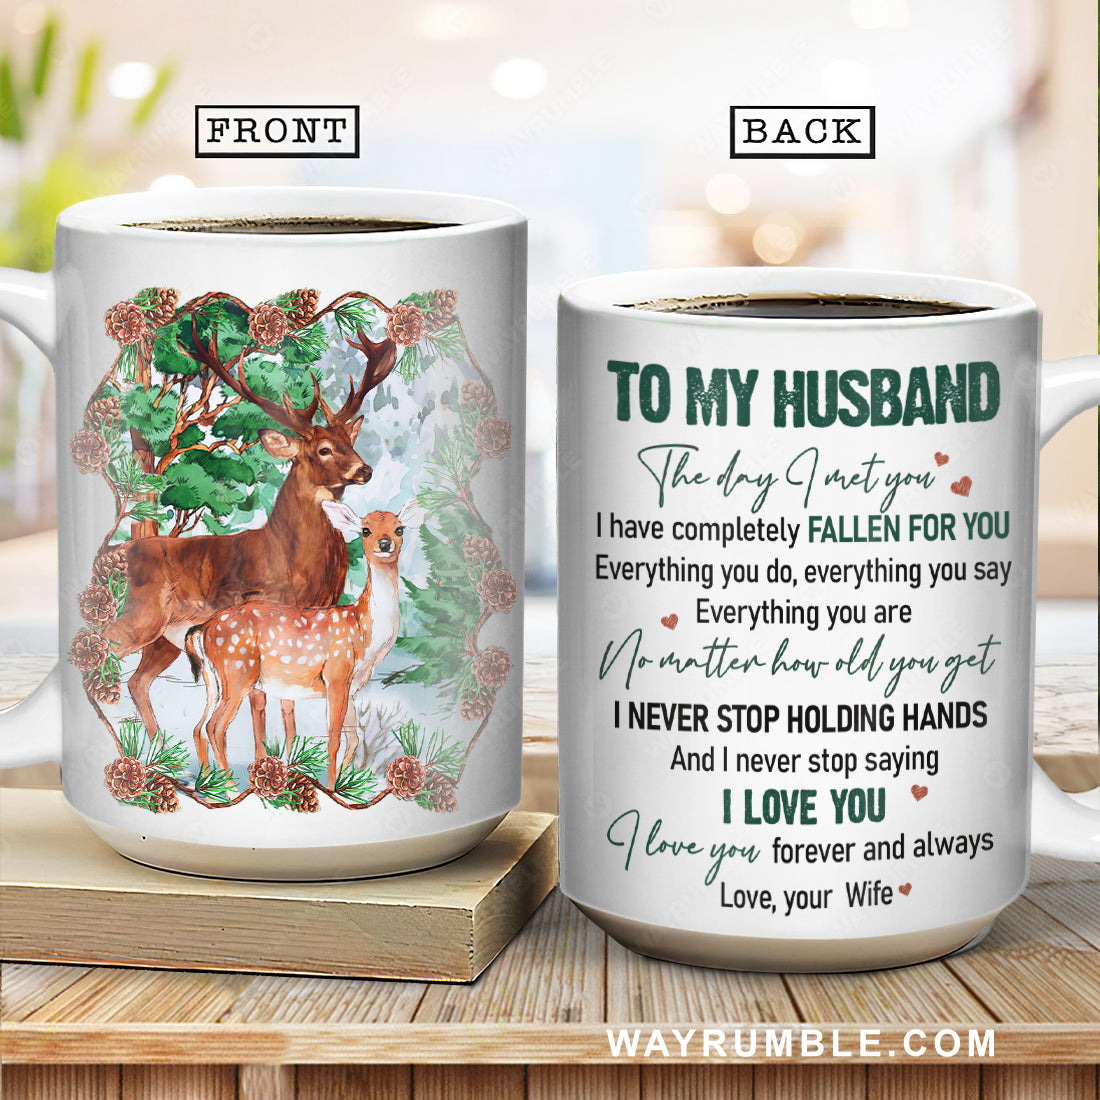 To my husband, Cute deer drawing, Green forest, I love you forever and always - Family White Mug 